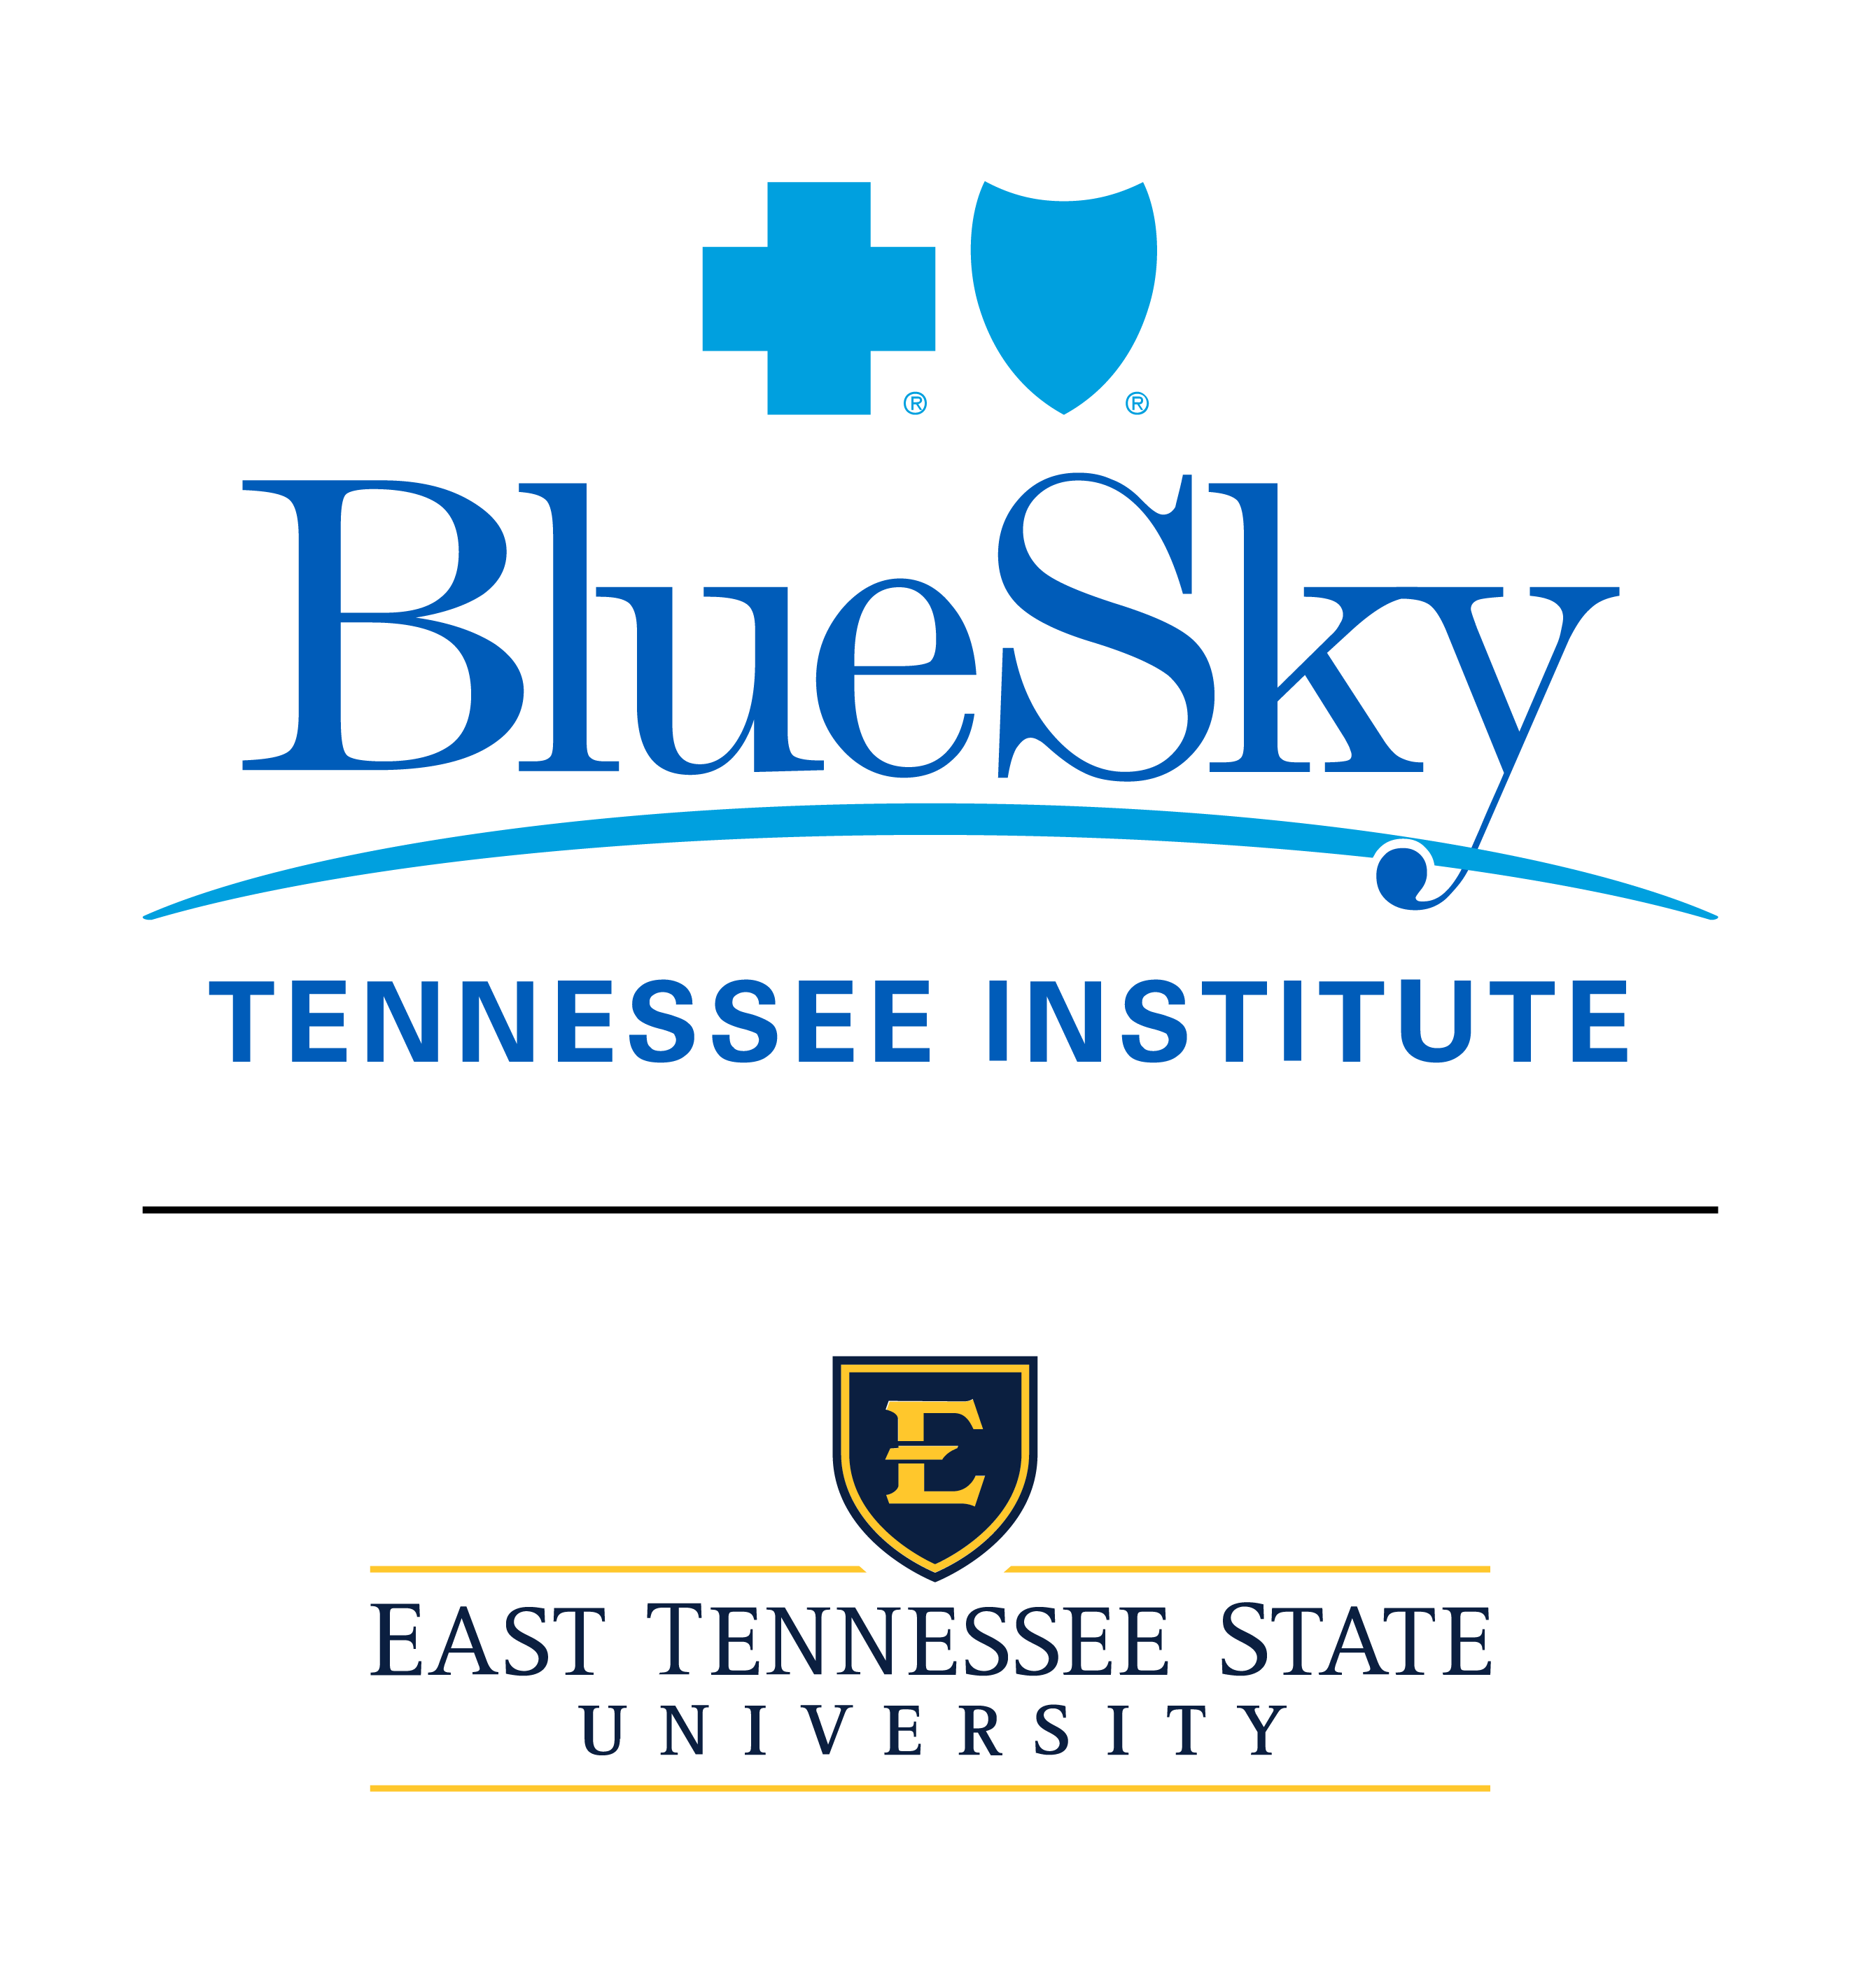 Featured image for “BlueCross, East Tennessee State University Launching BlueSky Tennessee Institute”